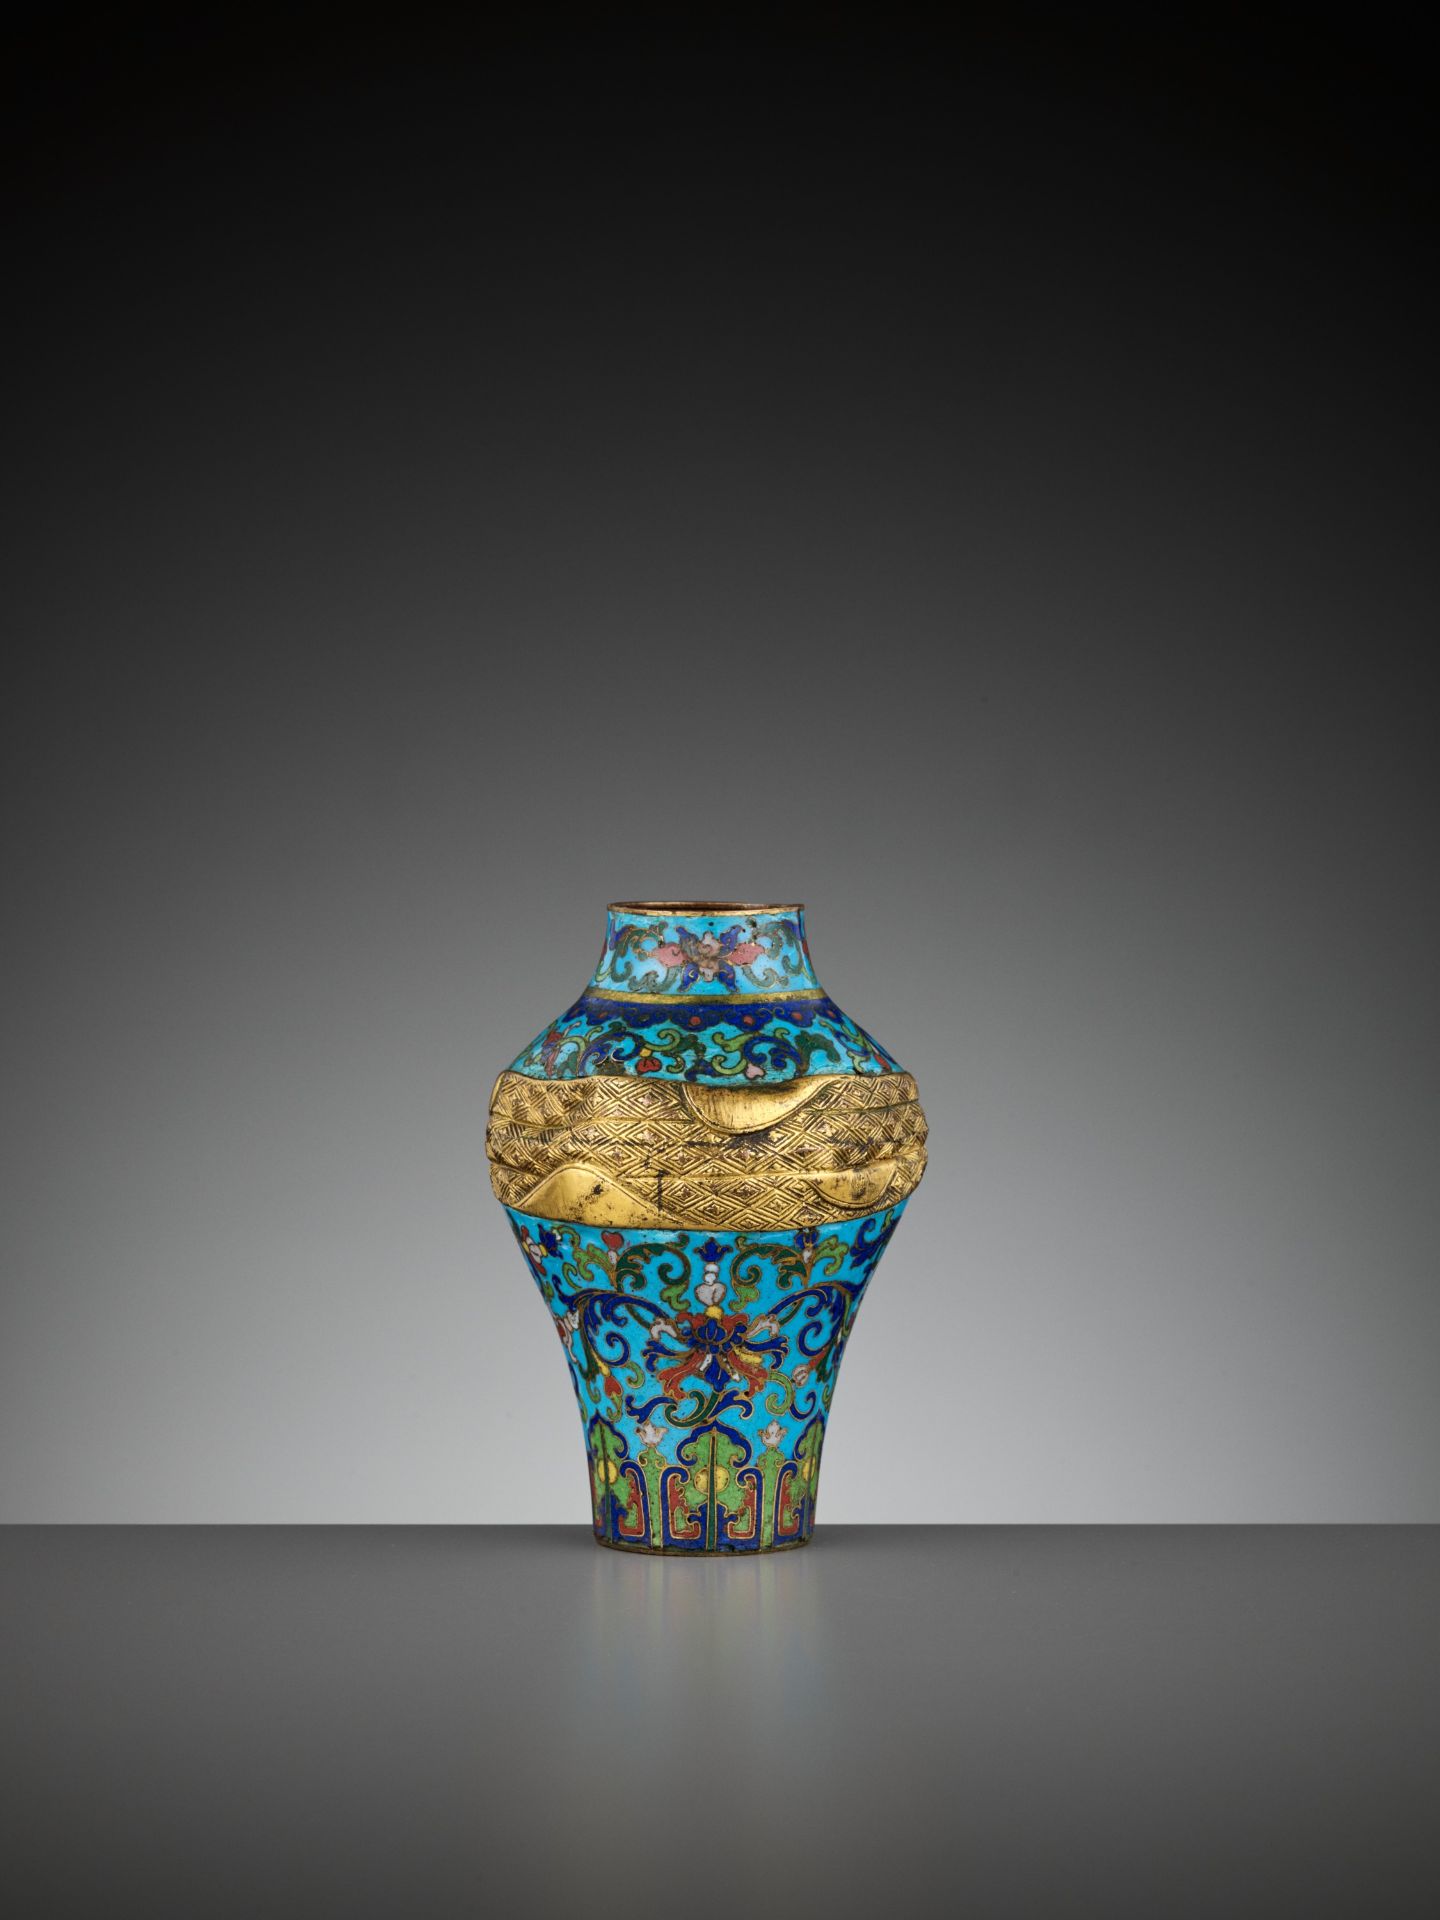 A RARE CLOISONNE ENAMEL 'SASH-TIED' BALUSTER VASE, ATTRIBUTED TO THE IMPERIAL WORKSHOPS, QIANLONG - Image 5 of 10